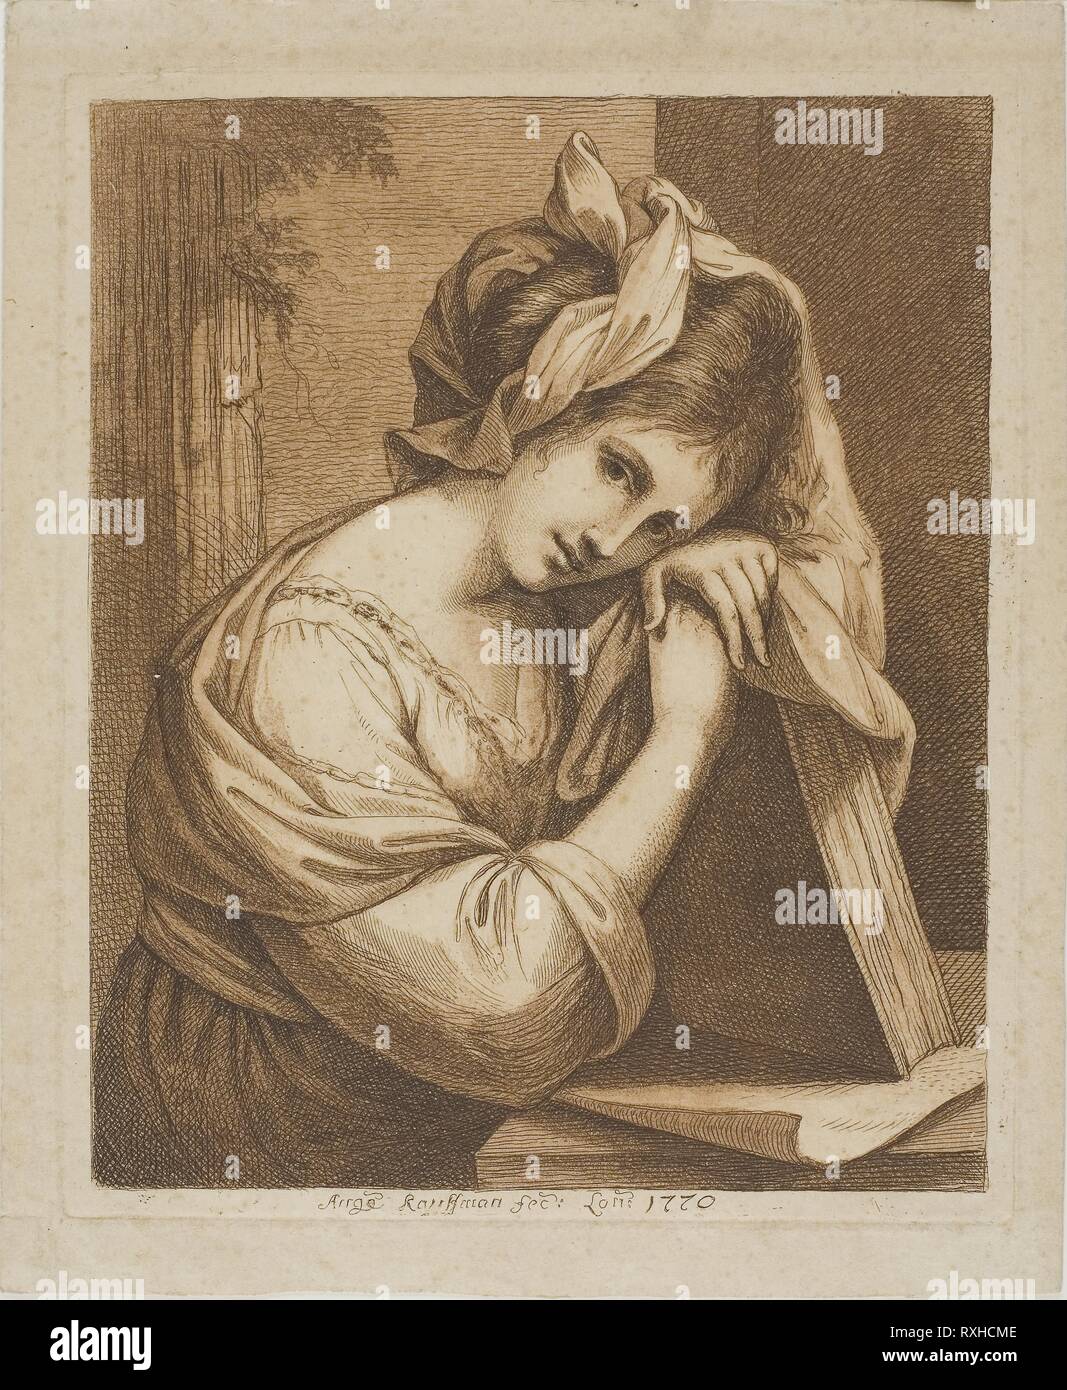 Woman Resting Her Head on a Book. Angelica Kauffmann; Swiss, 1741-1807. Date: 1770. Dimensions: 192 x 158 mm (plate); 216 x 176 mm (sheet). Etching and aquatint in brown on buff laid paper. Origin: Switzerland. Museum: The Chicago Art Institute. Stock Photo